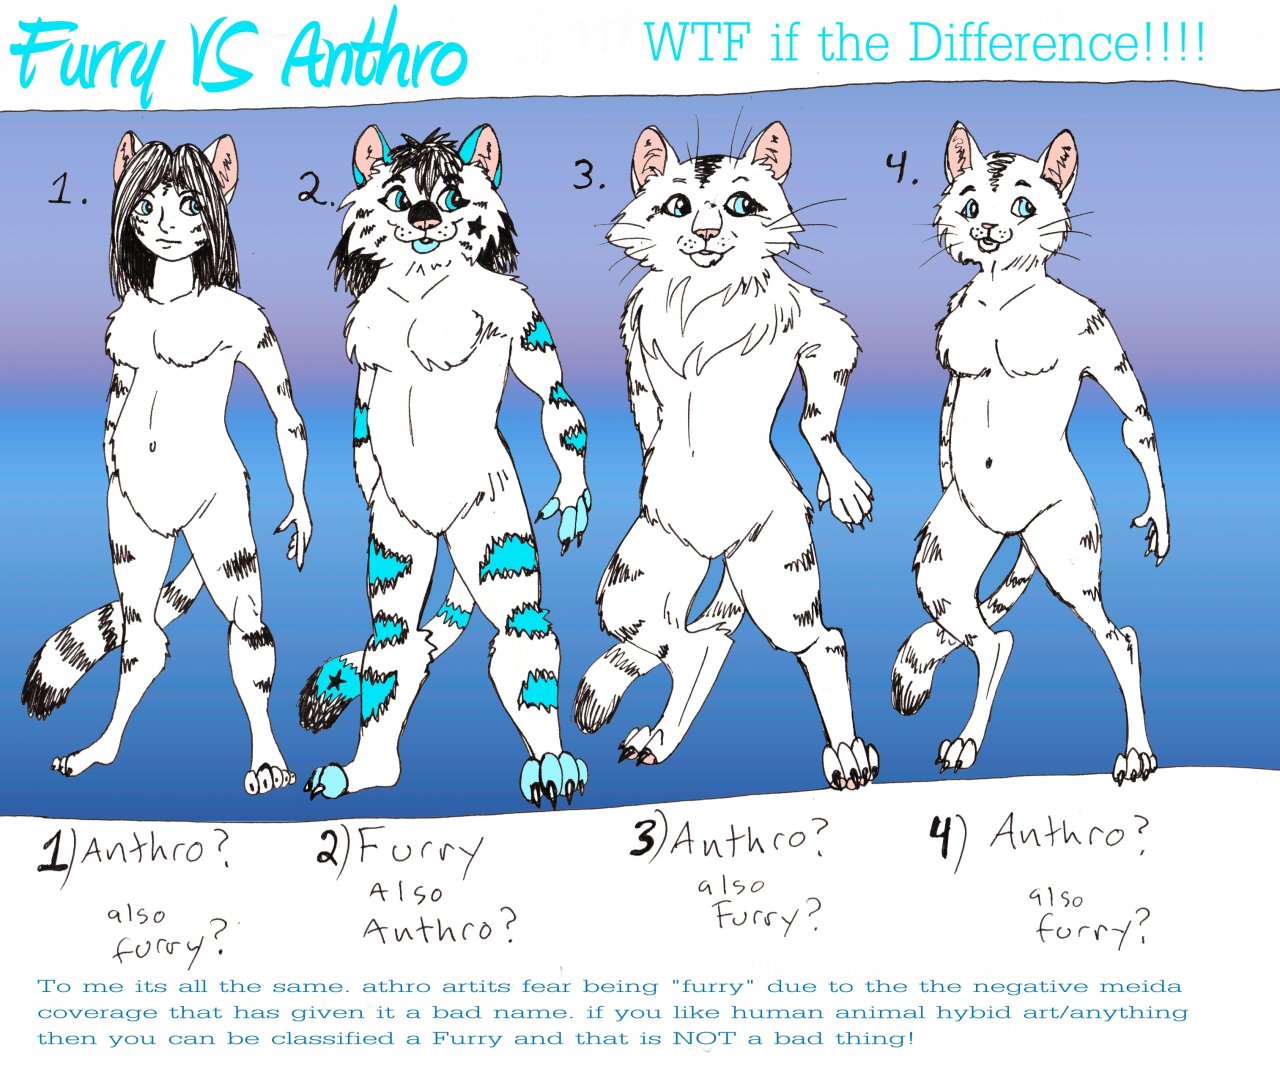 Anthro VS Furry...WTF is the difference! 